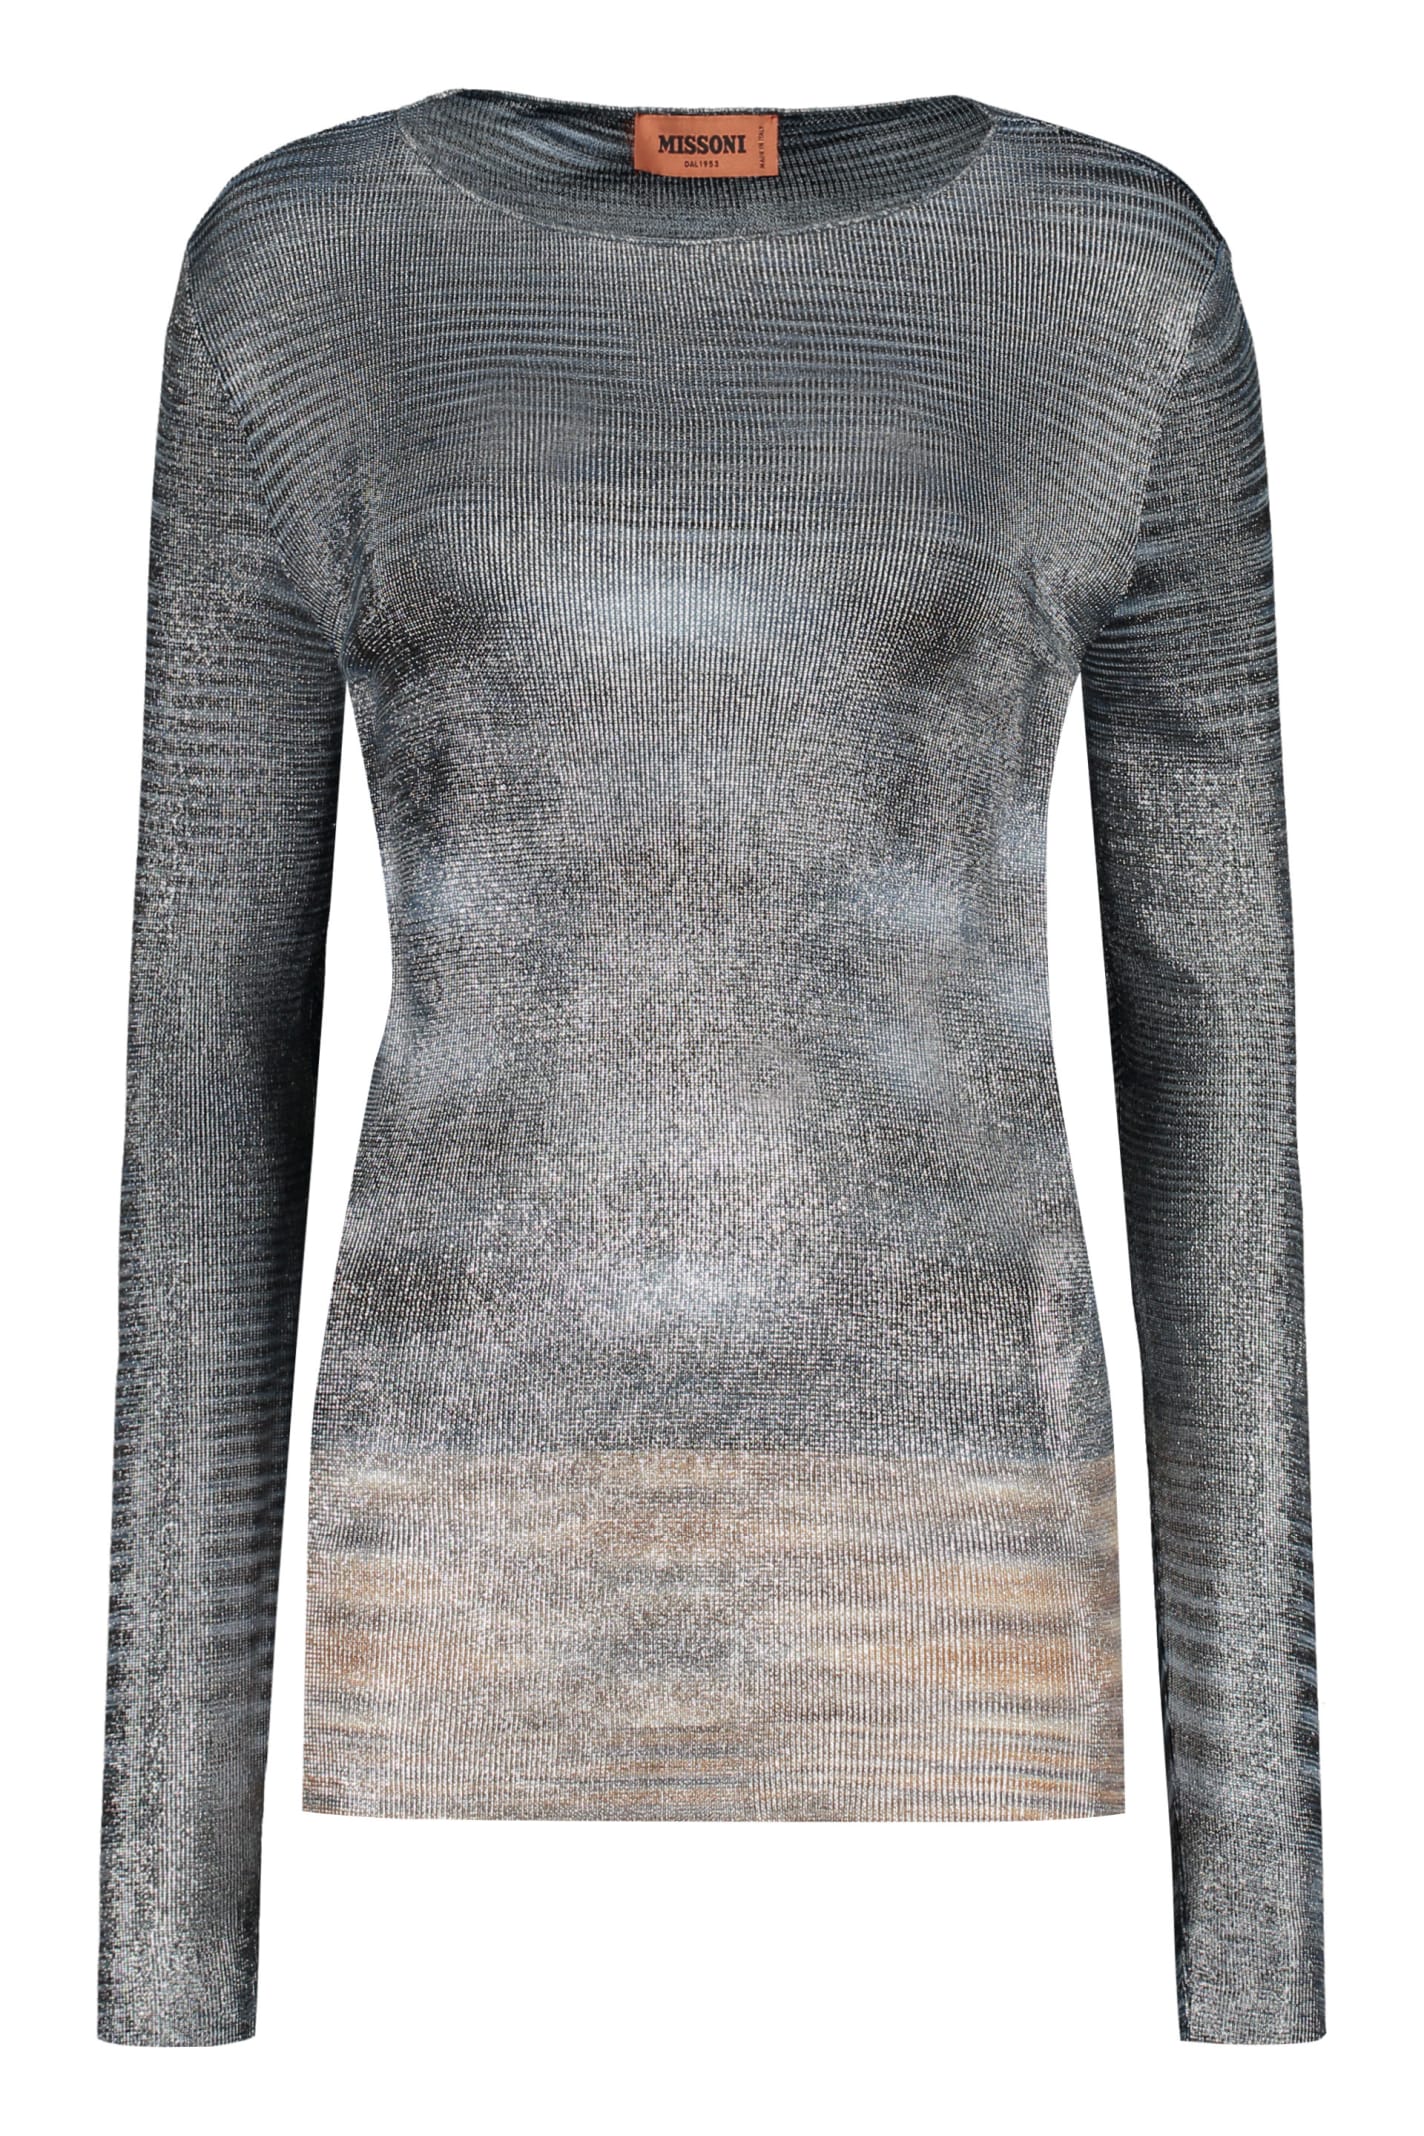 Missoni Knitted Viscosa-blend Top In Blue